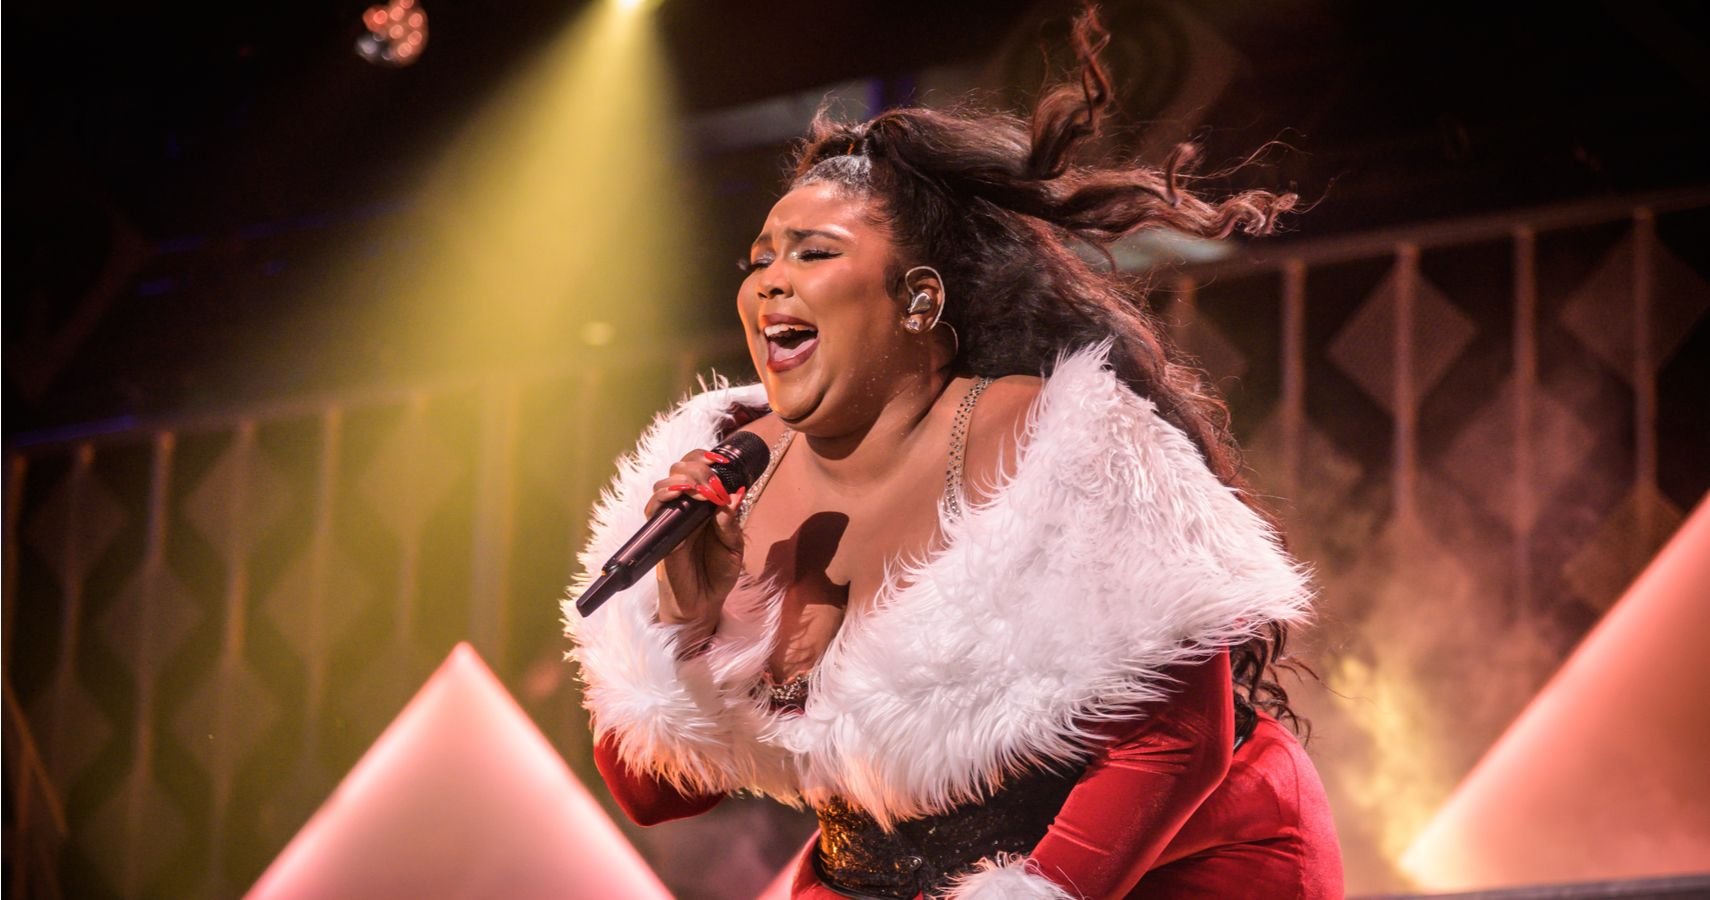 A Brand New Closet: Lizzo Surprises Her Mom With An Entirely New Wardrobe On Her Birthday